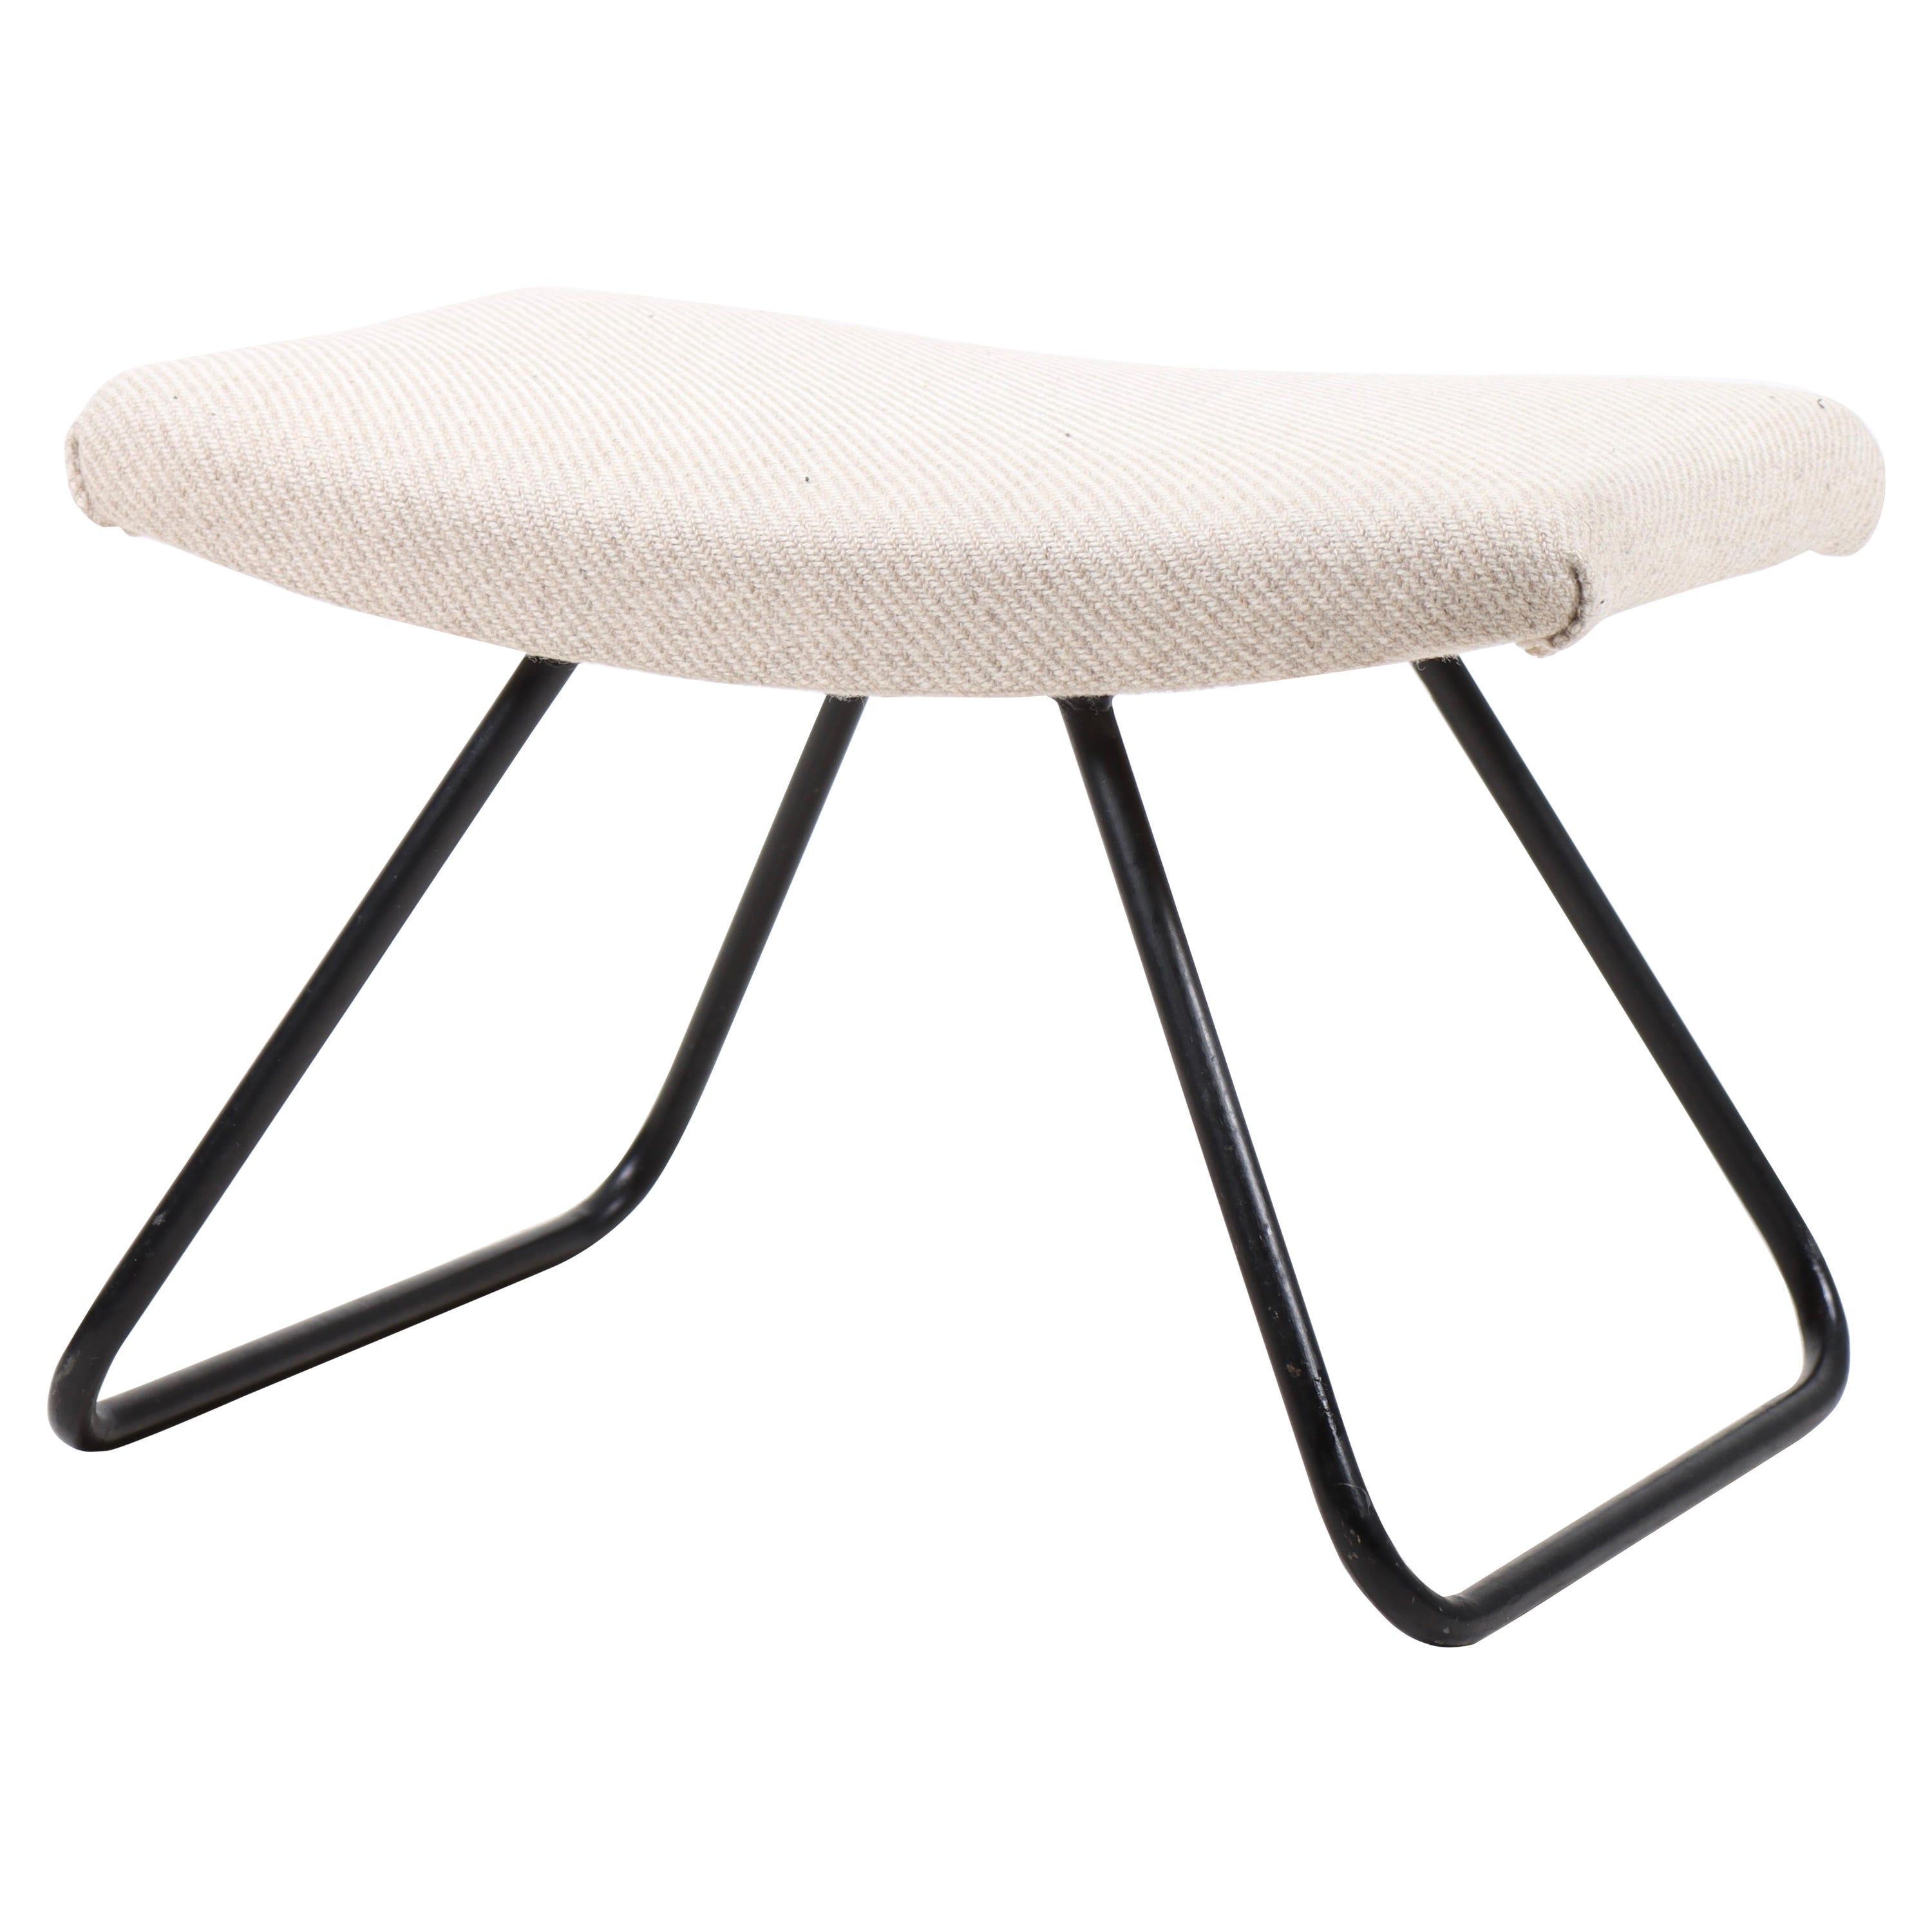 Midcentury Stool with Fabric, Made in Denmark 1960s